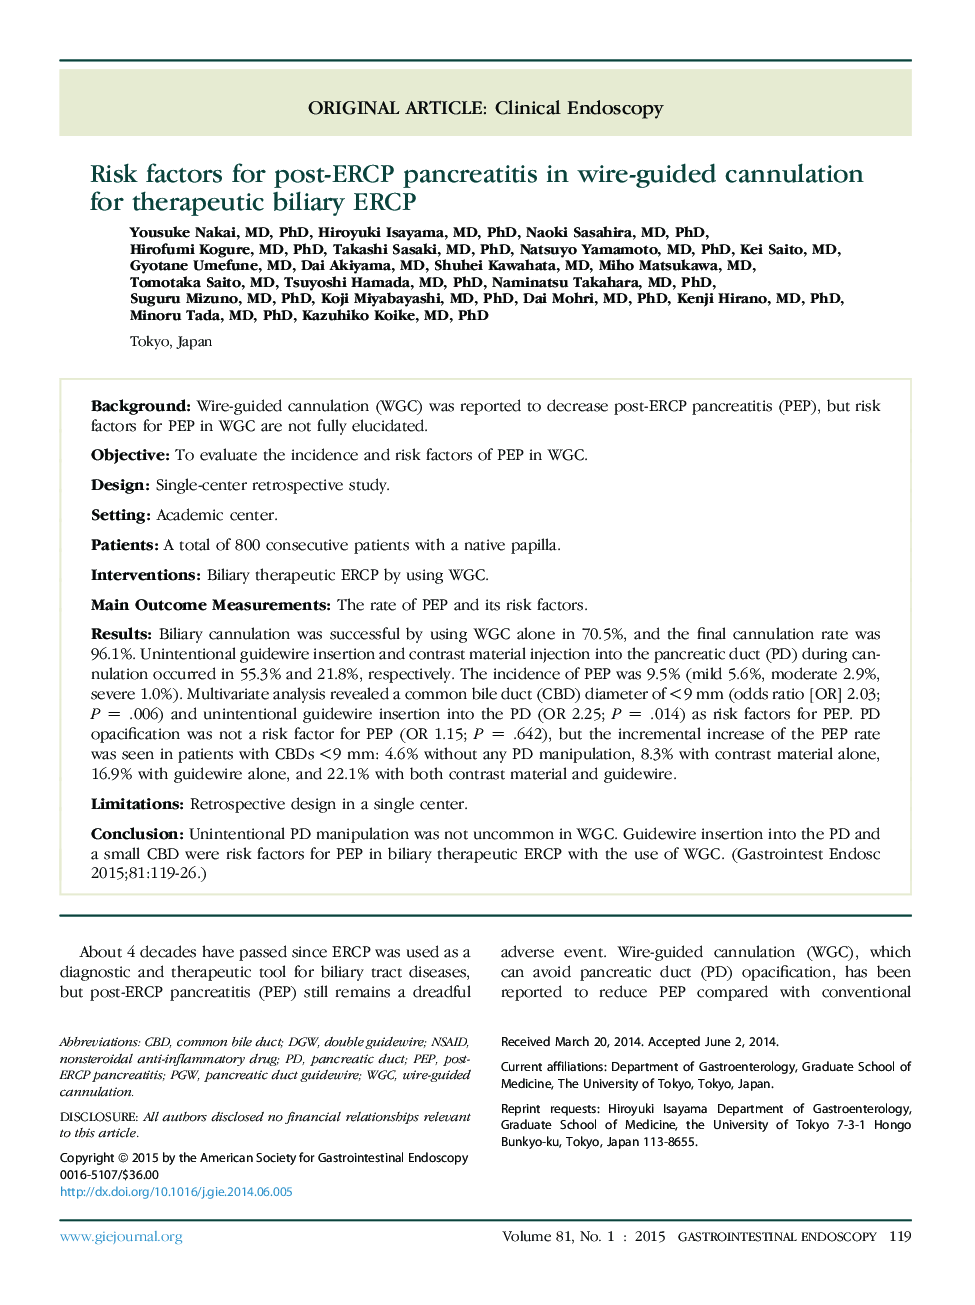 Risk factors for post-ERCP pancreatitis in wire-guided cannulation for therapeutic biliary ERCP 